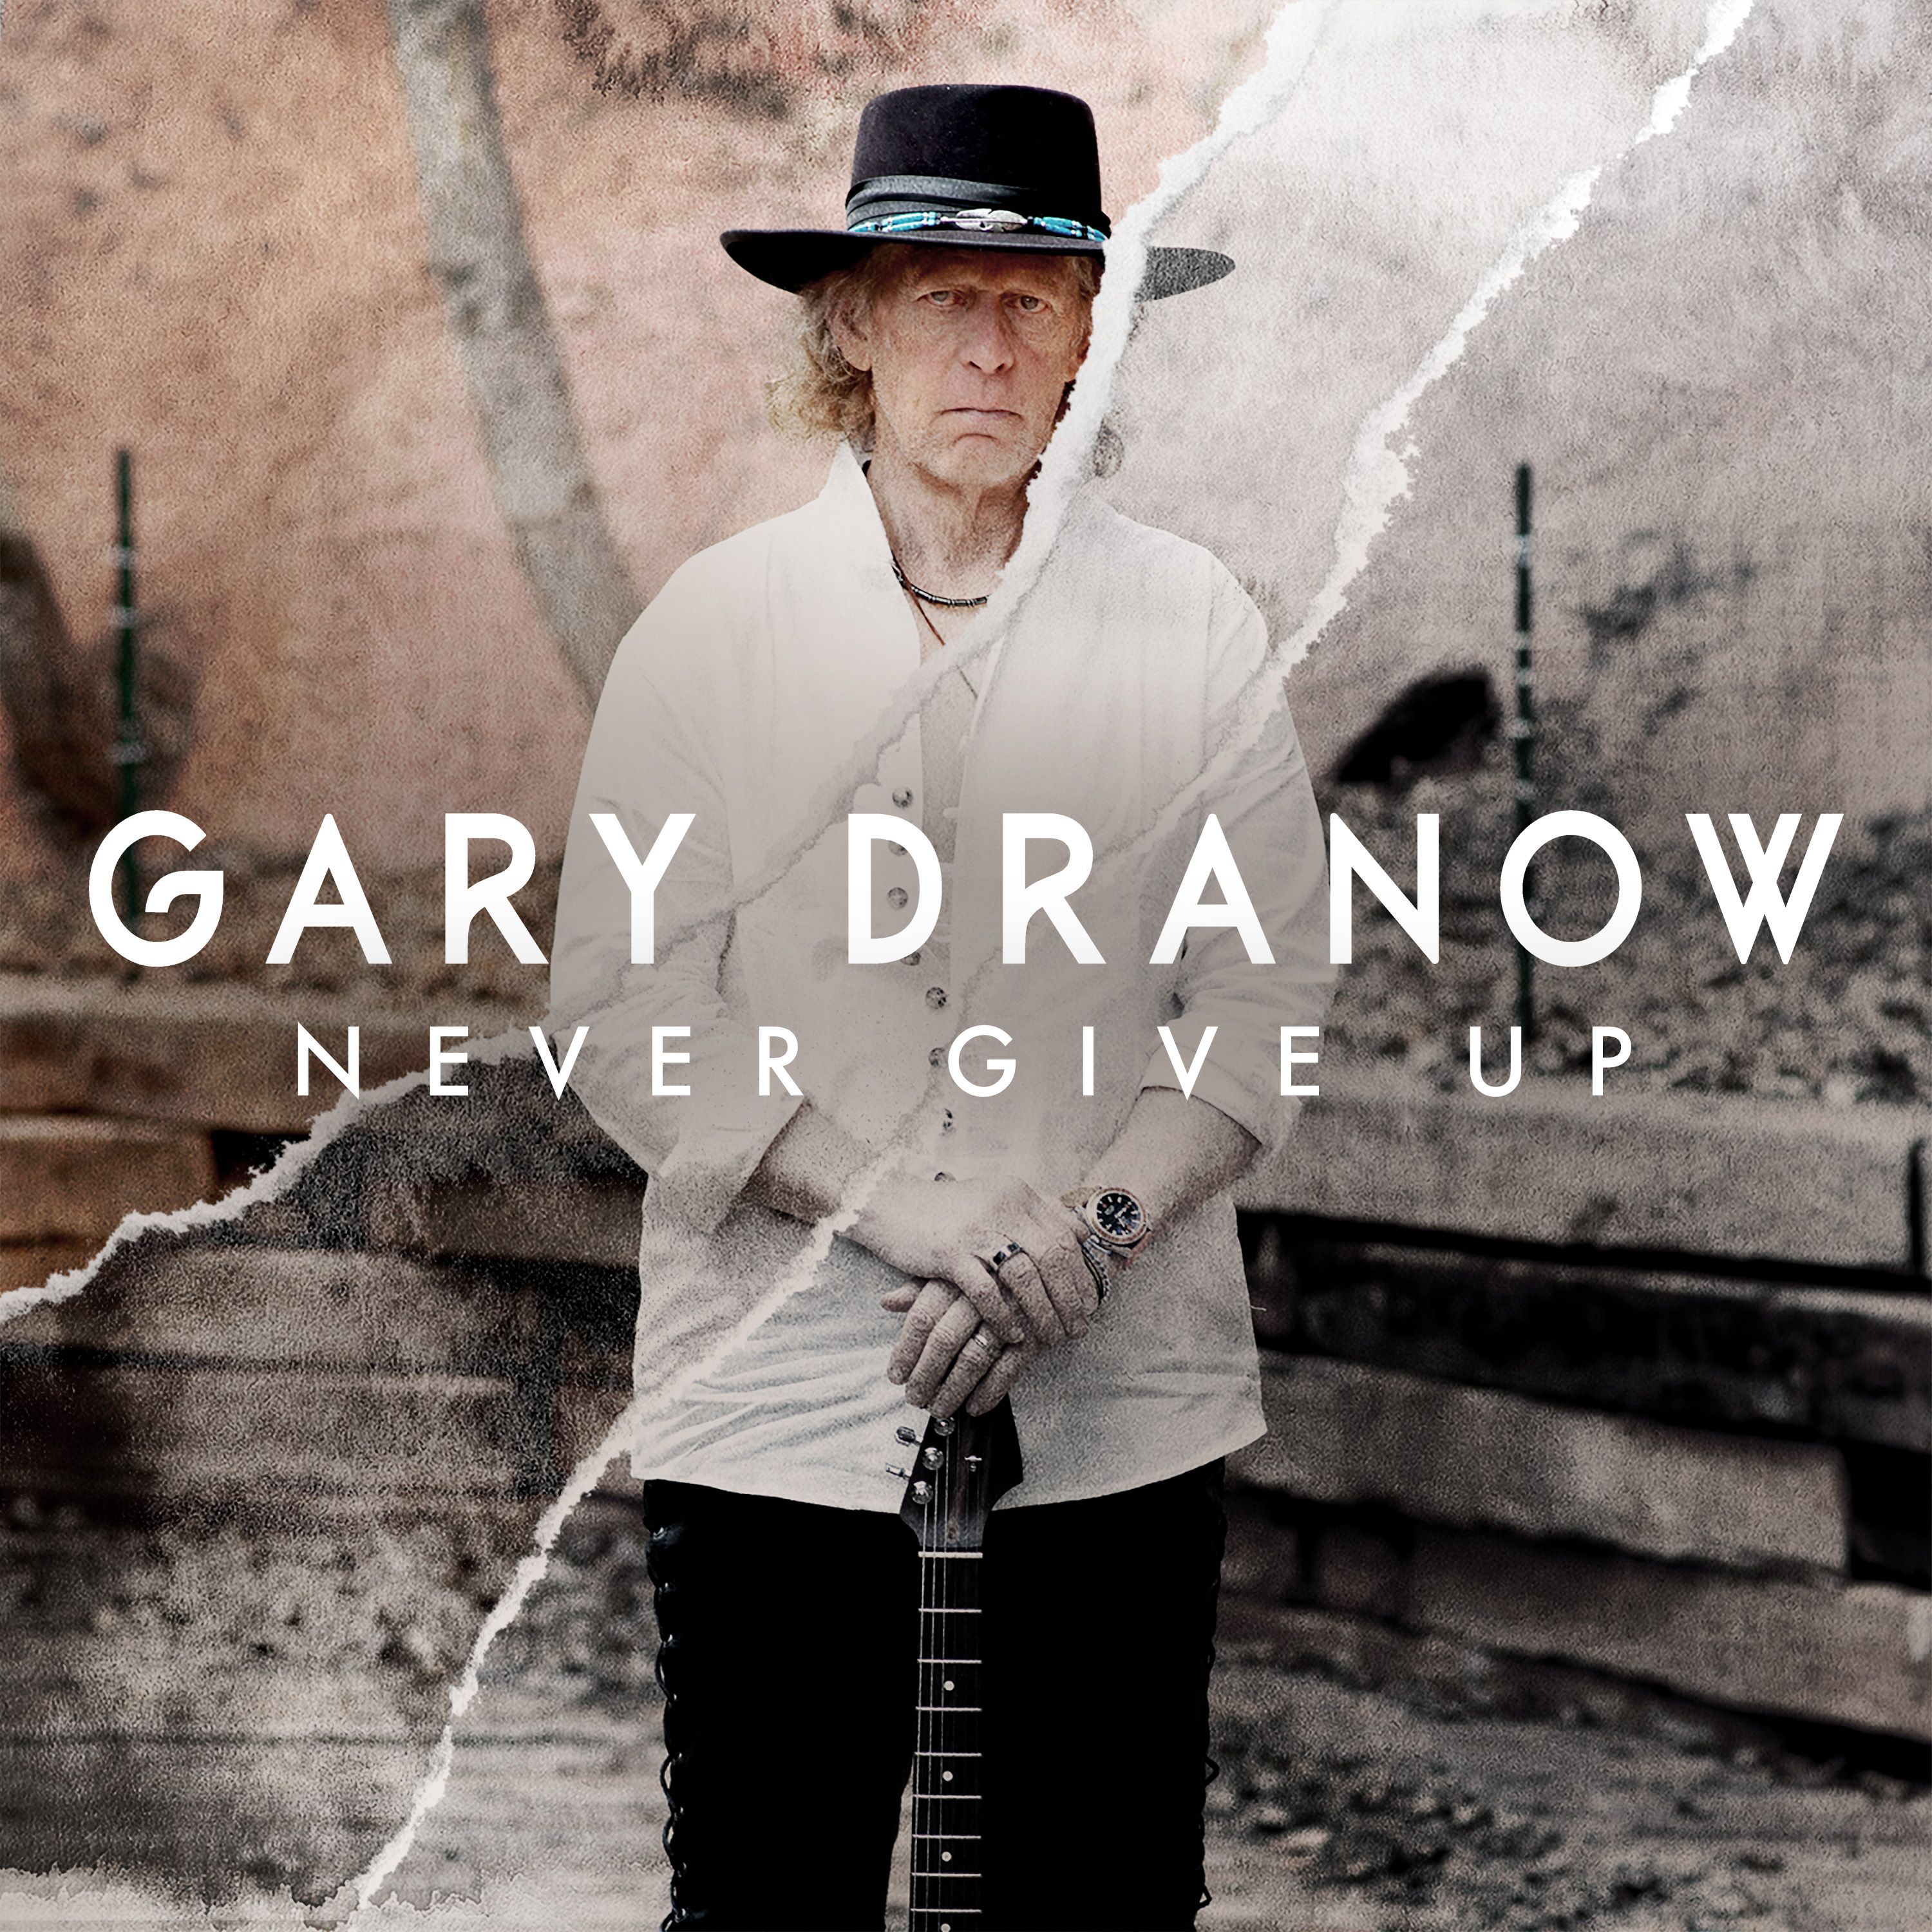 Gary Dranow – “Never Give Up”